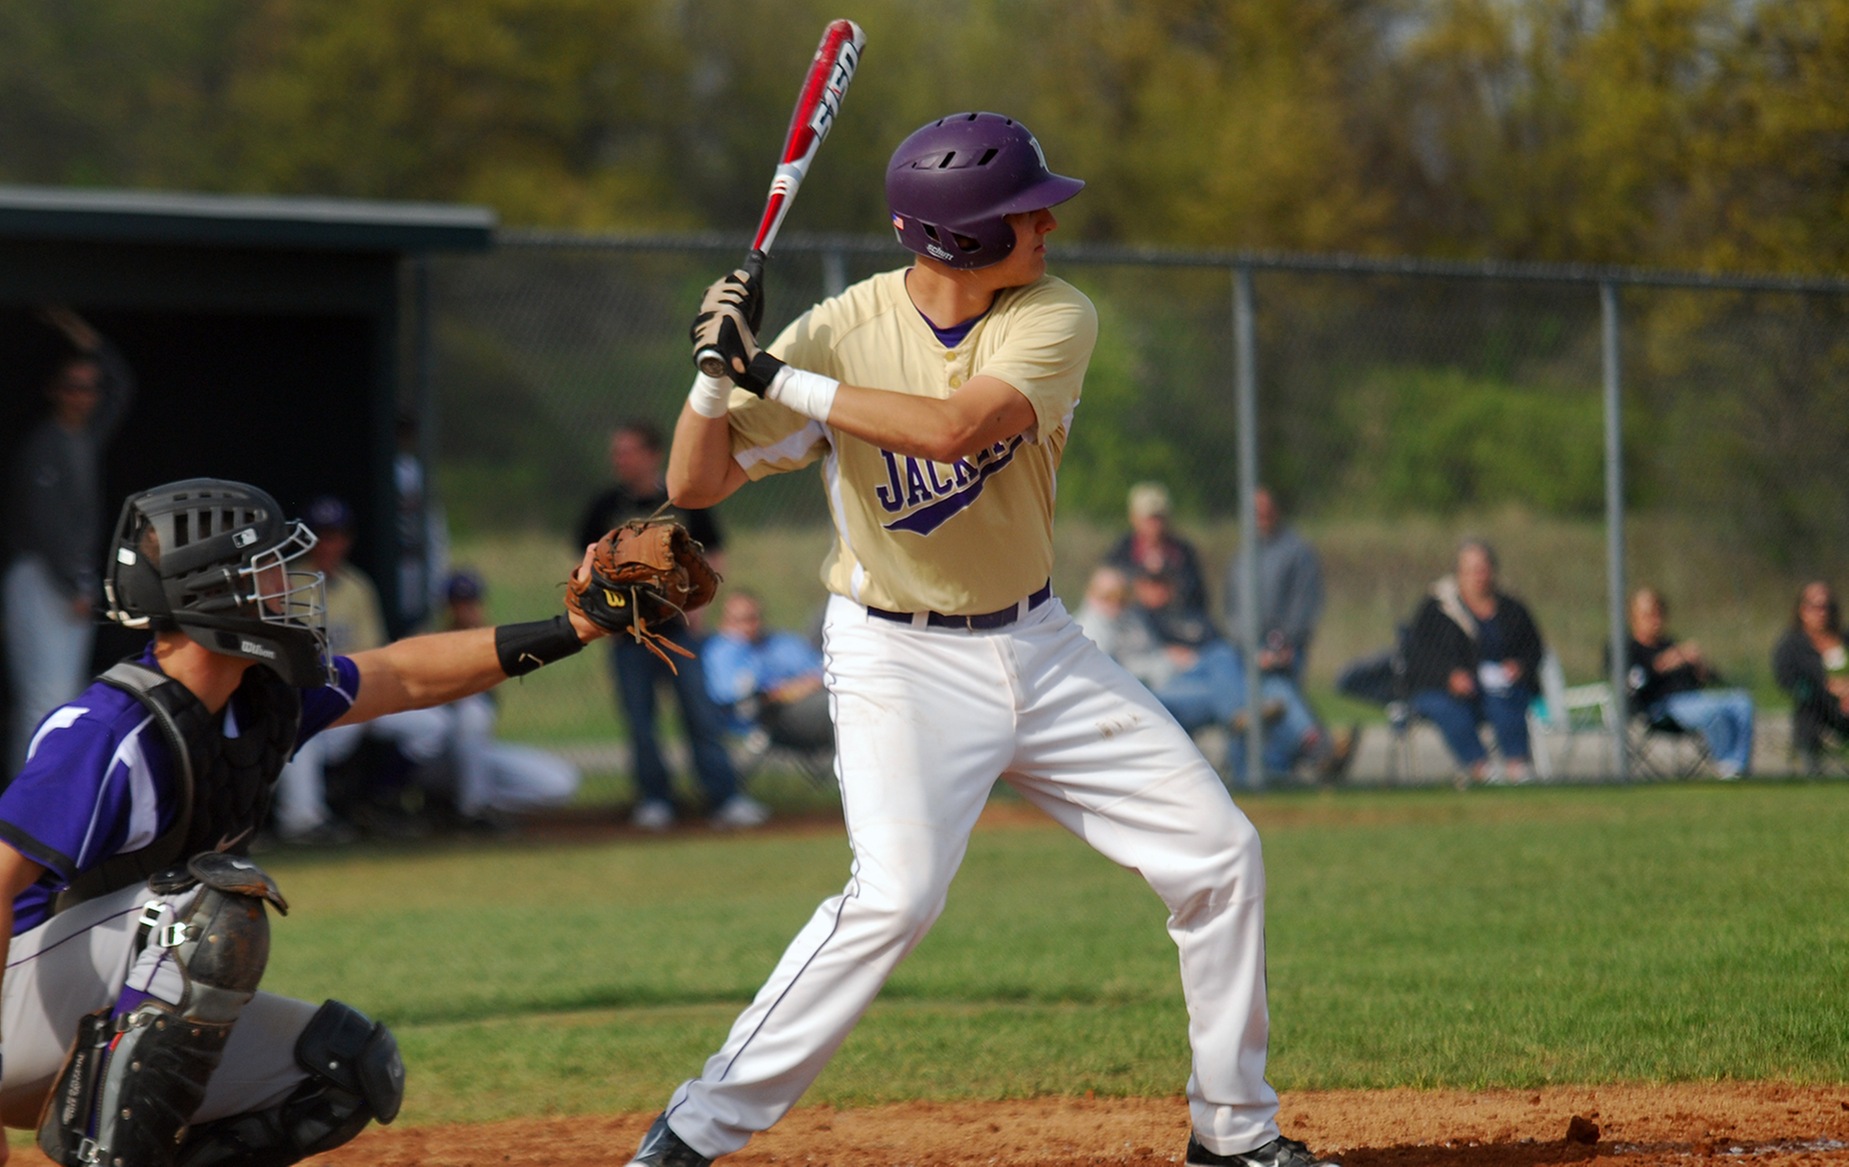 Waterman Delivers Game-Winning Hit at Bluffton